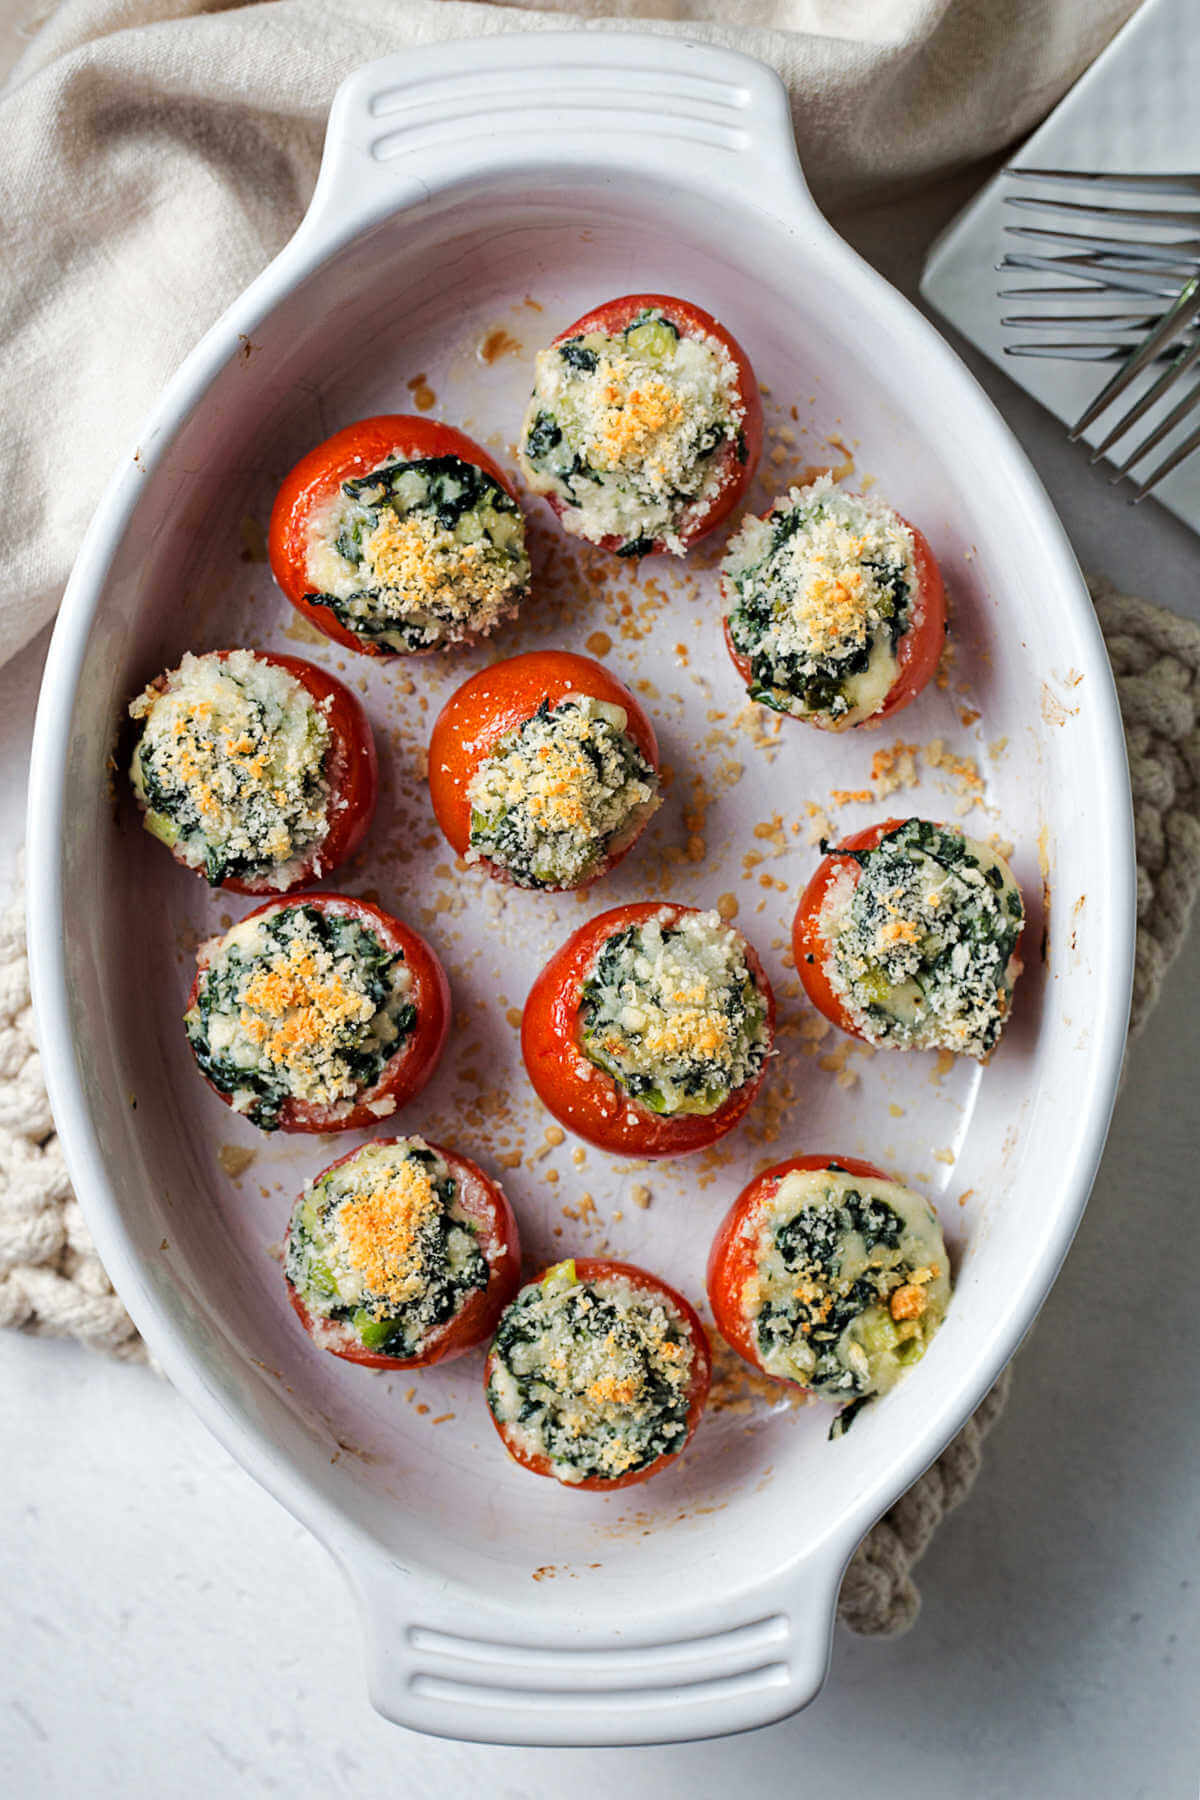 spinach stuffed baked tomatoes in a baking dish straight from the oven.